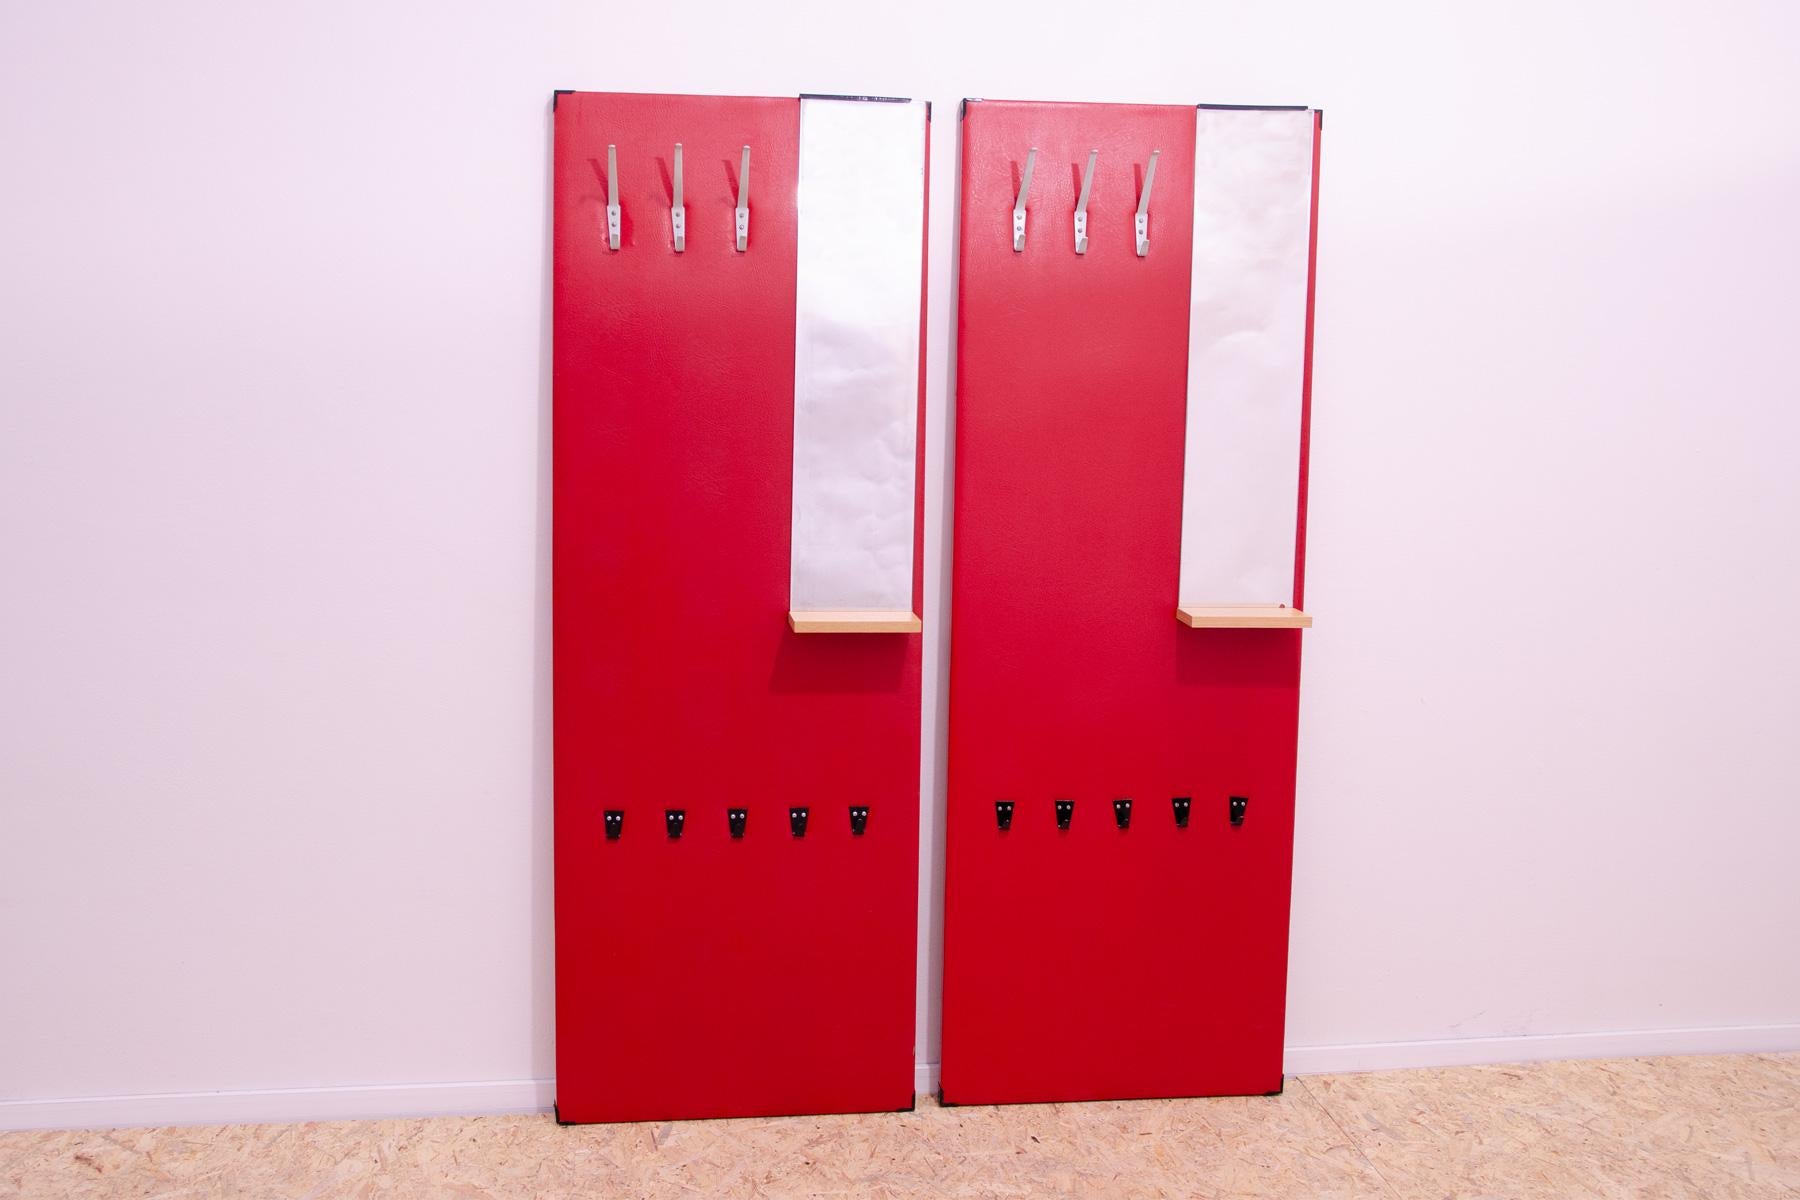 These identical hall coat racks were made in the former Czechoslovakia in the 1960s and produced by DREVOTVAR. Material: plywood, wood, leatherette, metal. It can be mounted on the wall or laid freely on the floor.

It is a characteristic example of